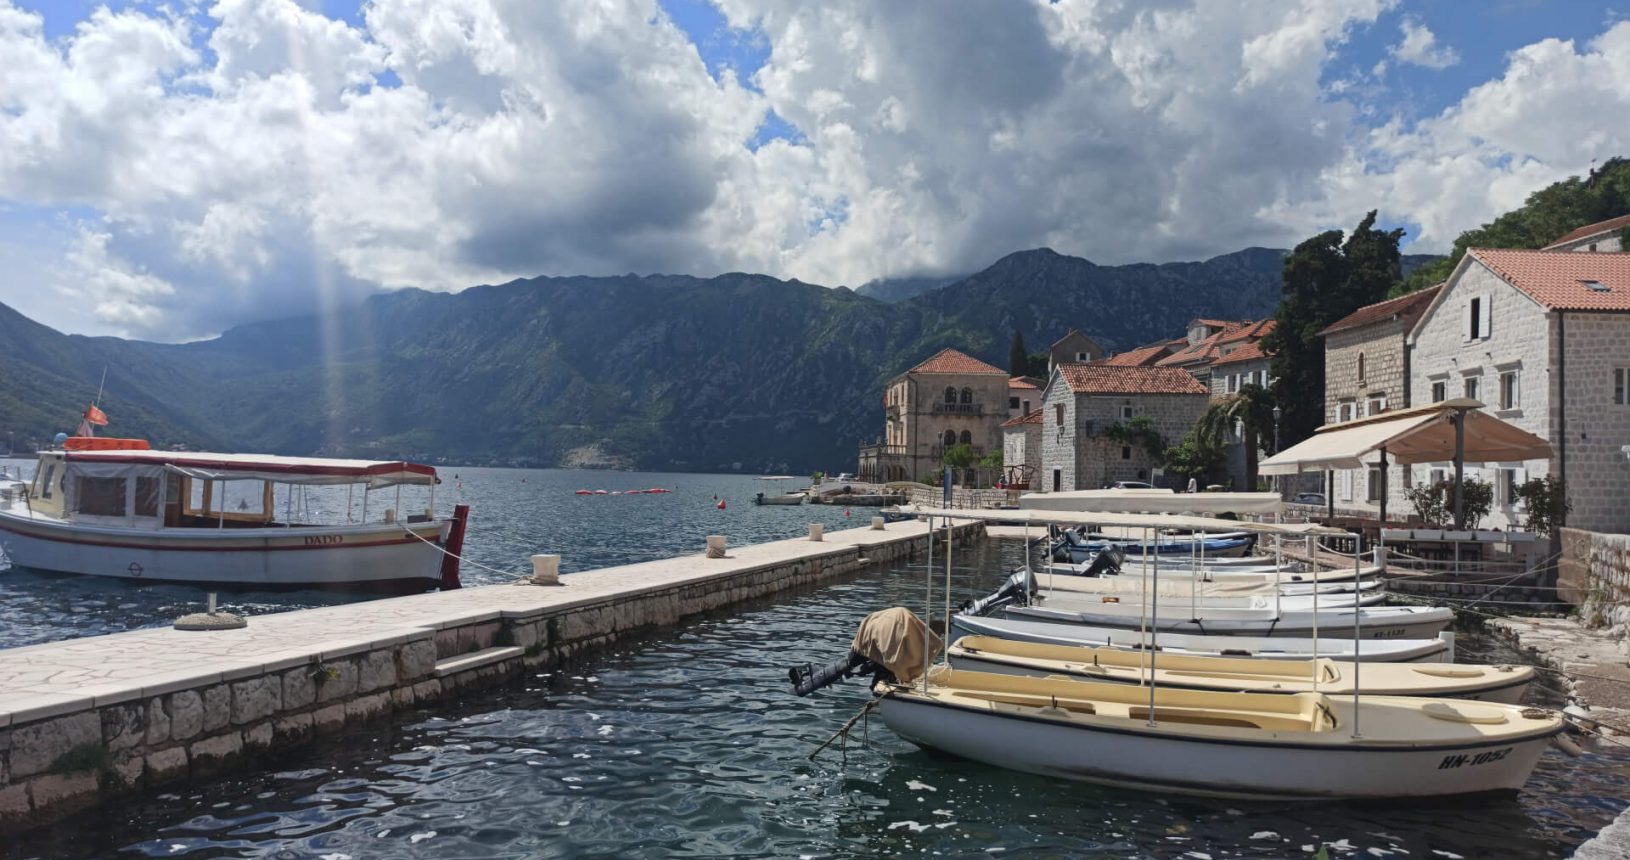 Boats and mountains view in Perast